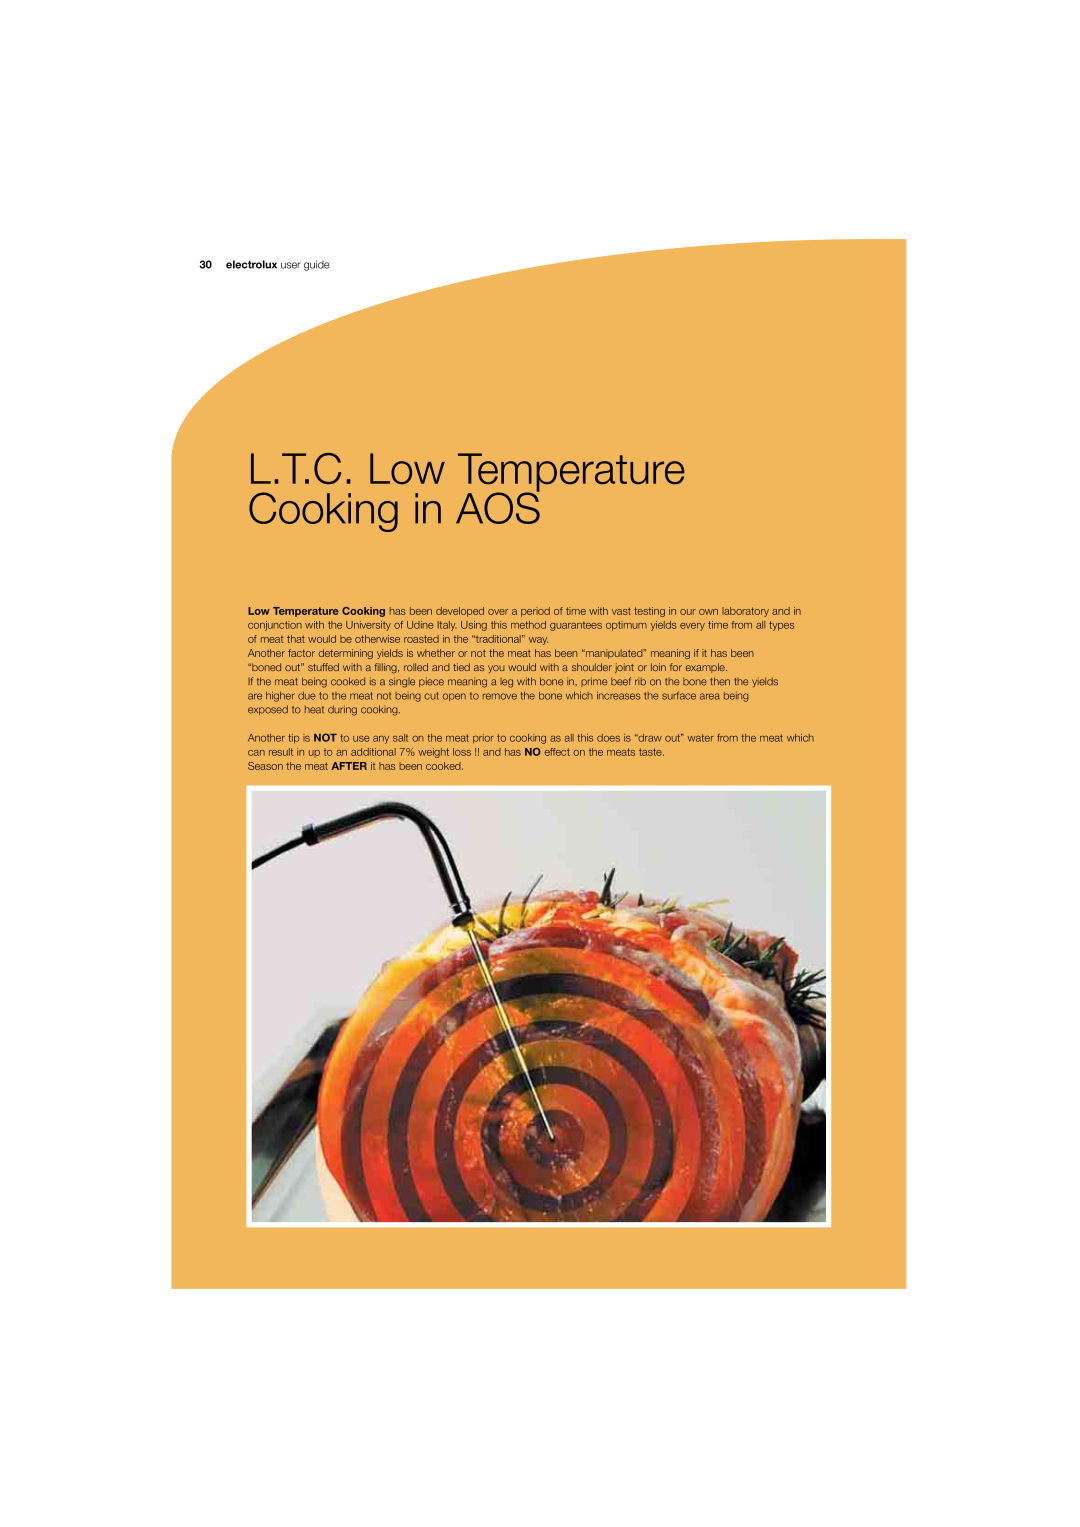 Electrolux 180 manual L.T.C. Low Temperature Cooking in AOS, electrolux user guide 